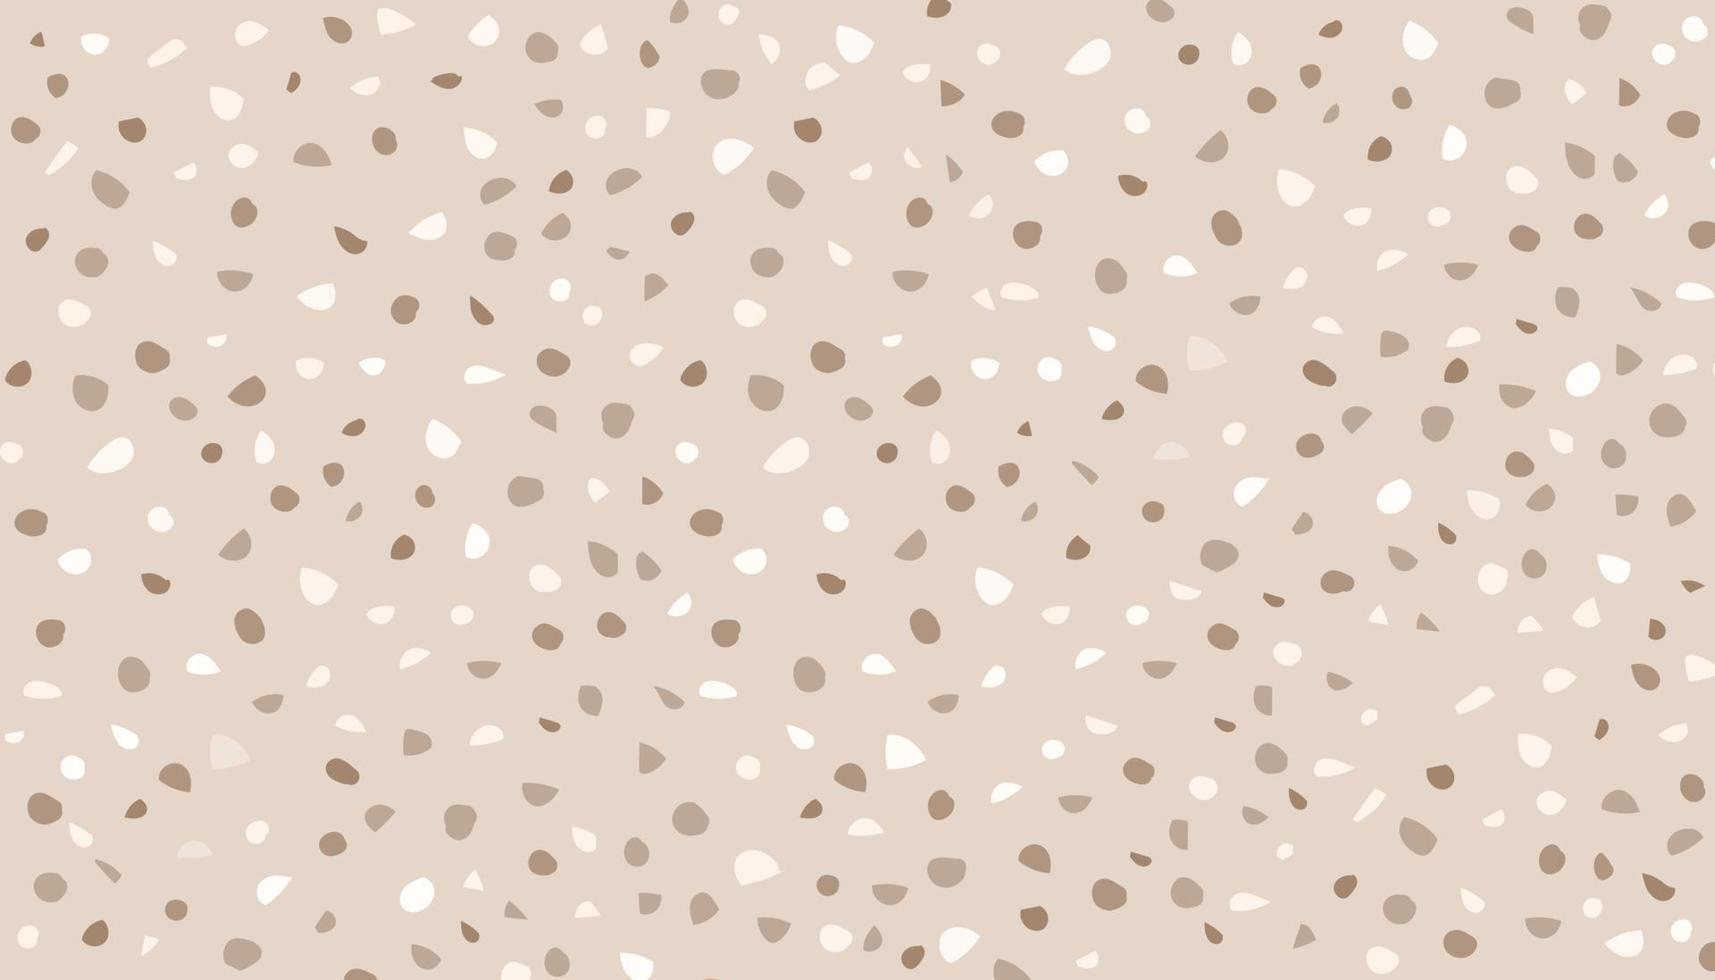 Grey terrazzo background abstract simple vector illustration